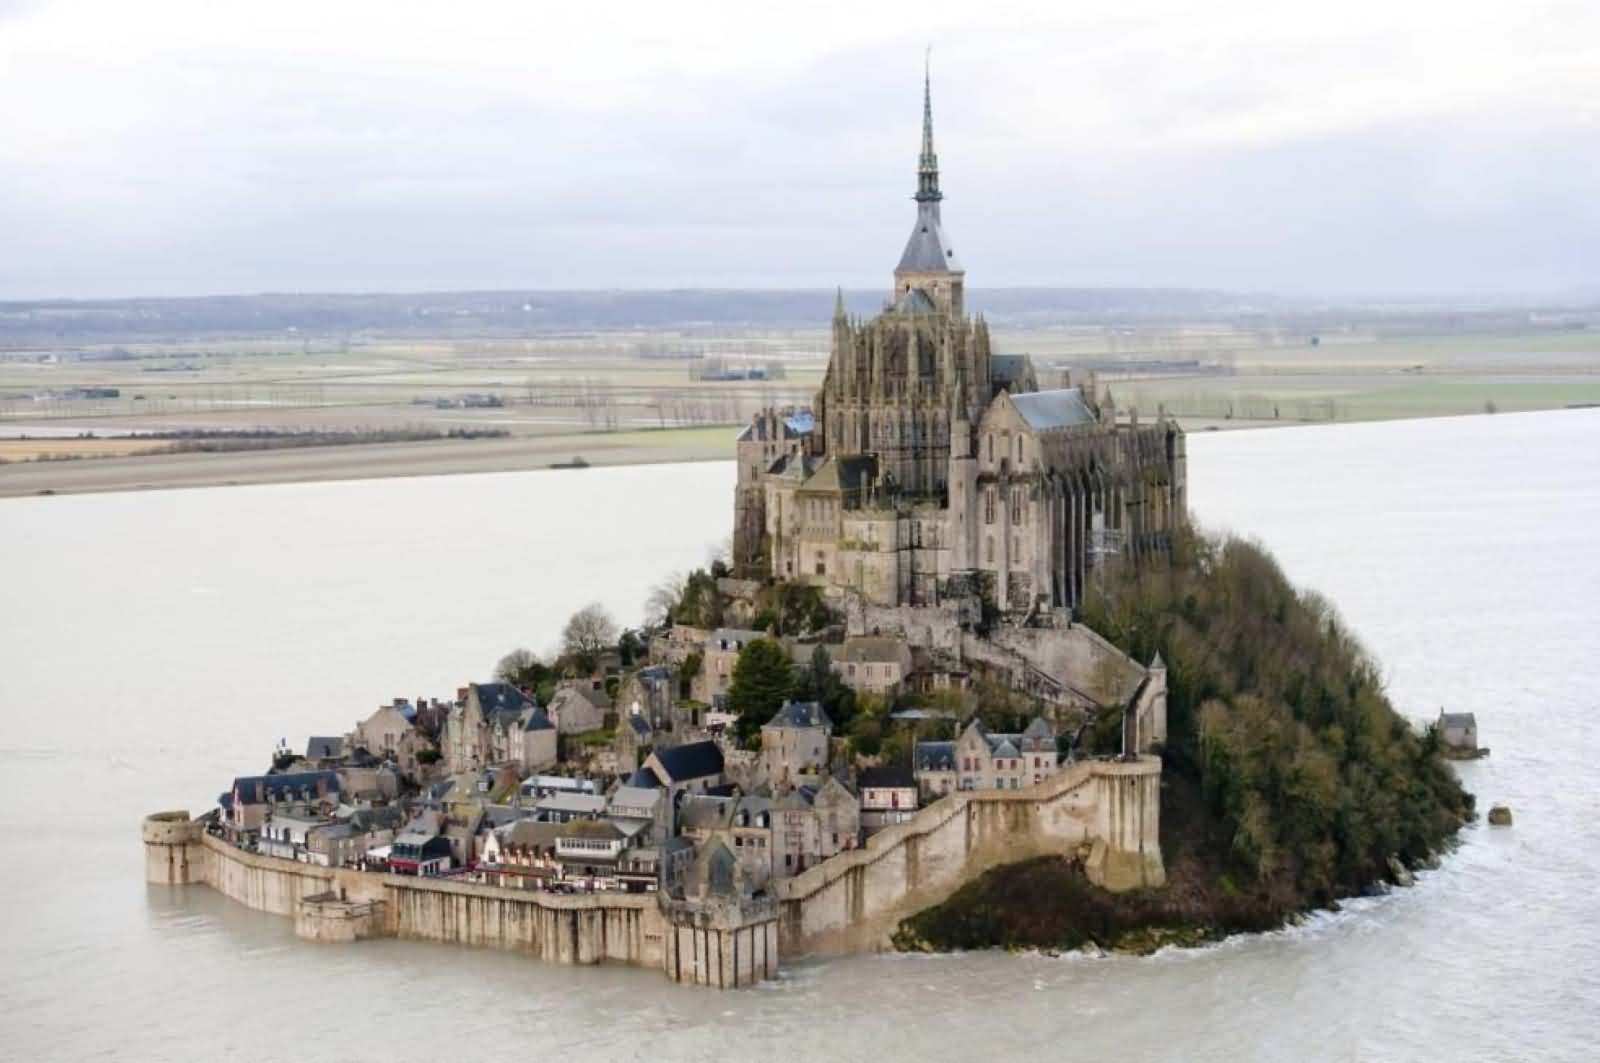 Back side view of the Mont Saint-Michel, france